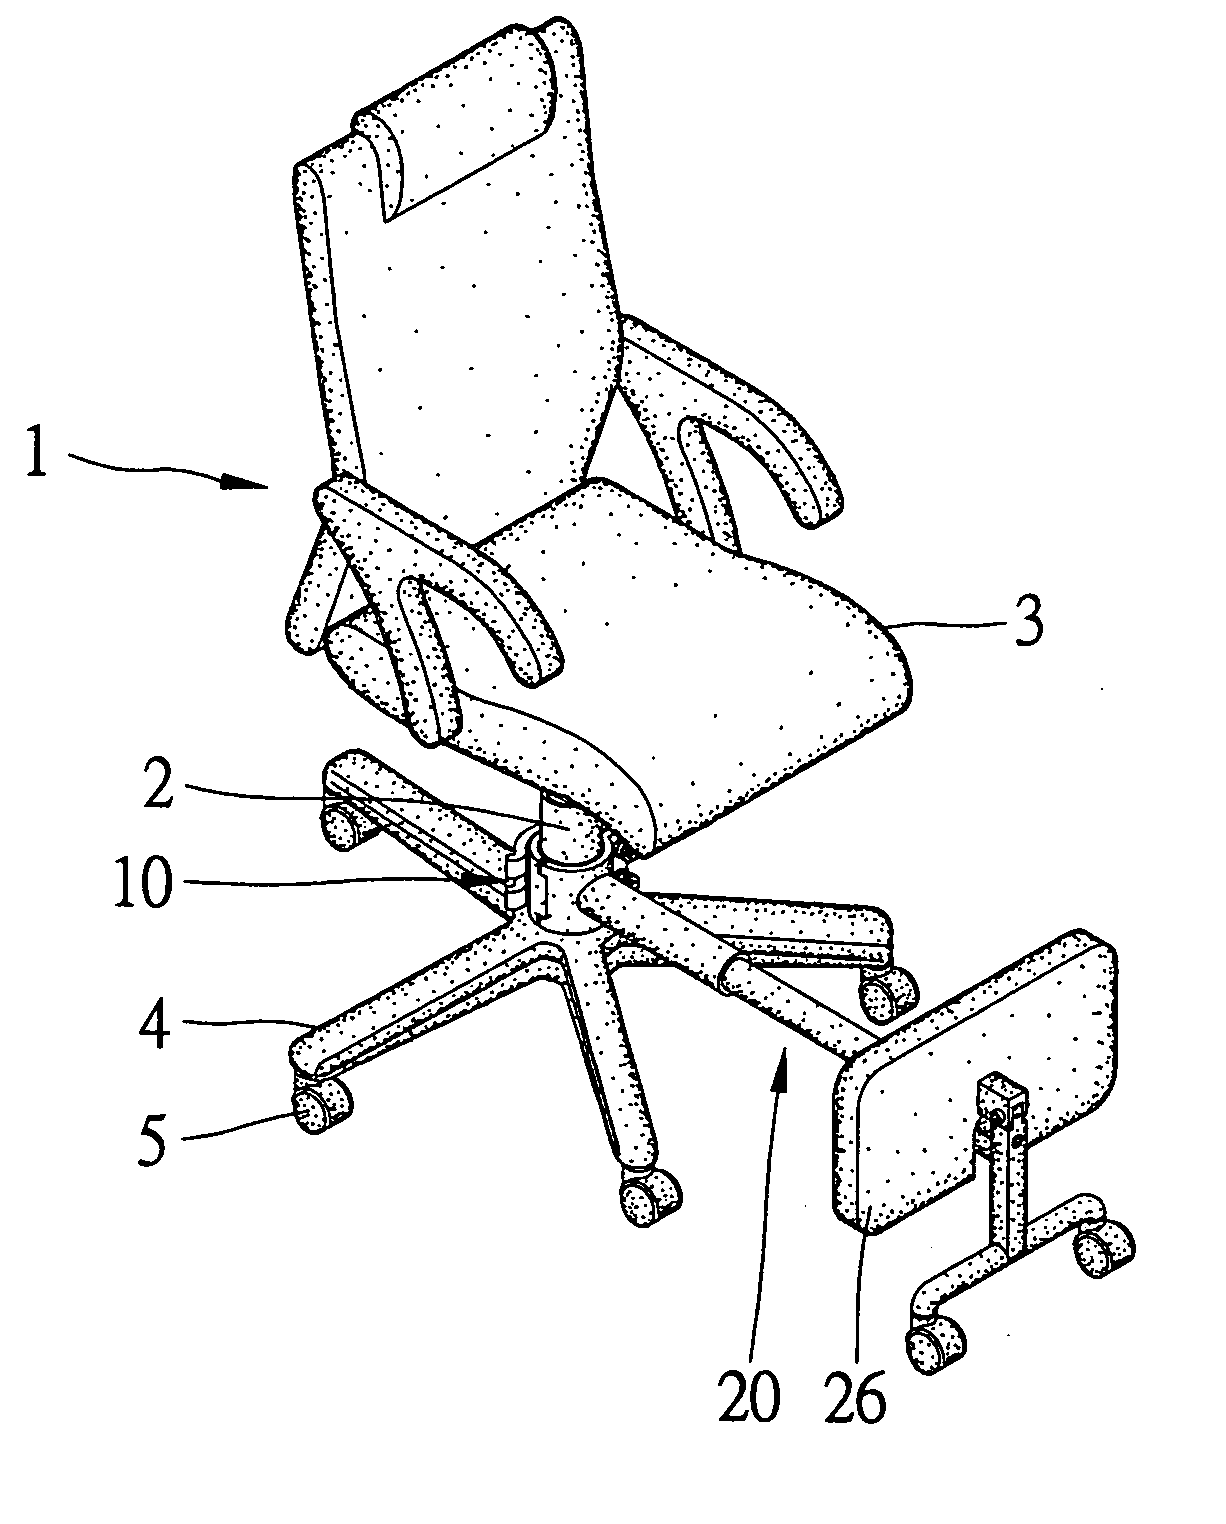 Stool apparatus for chair